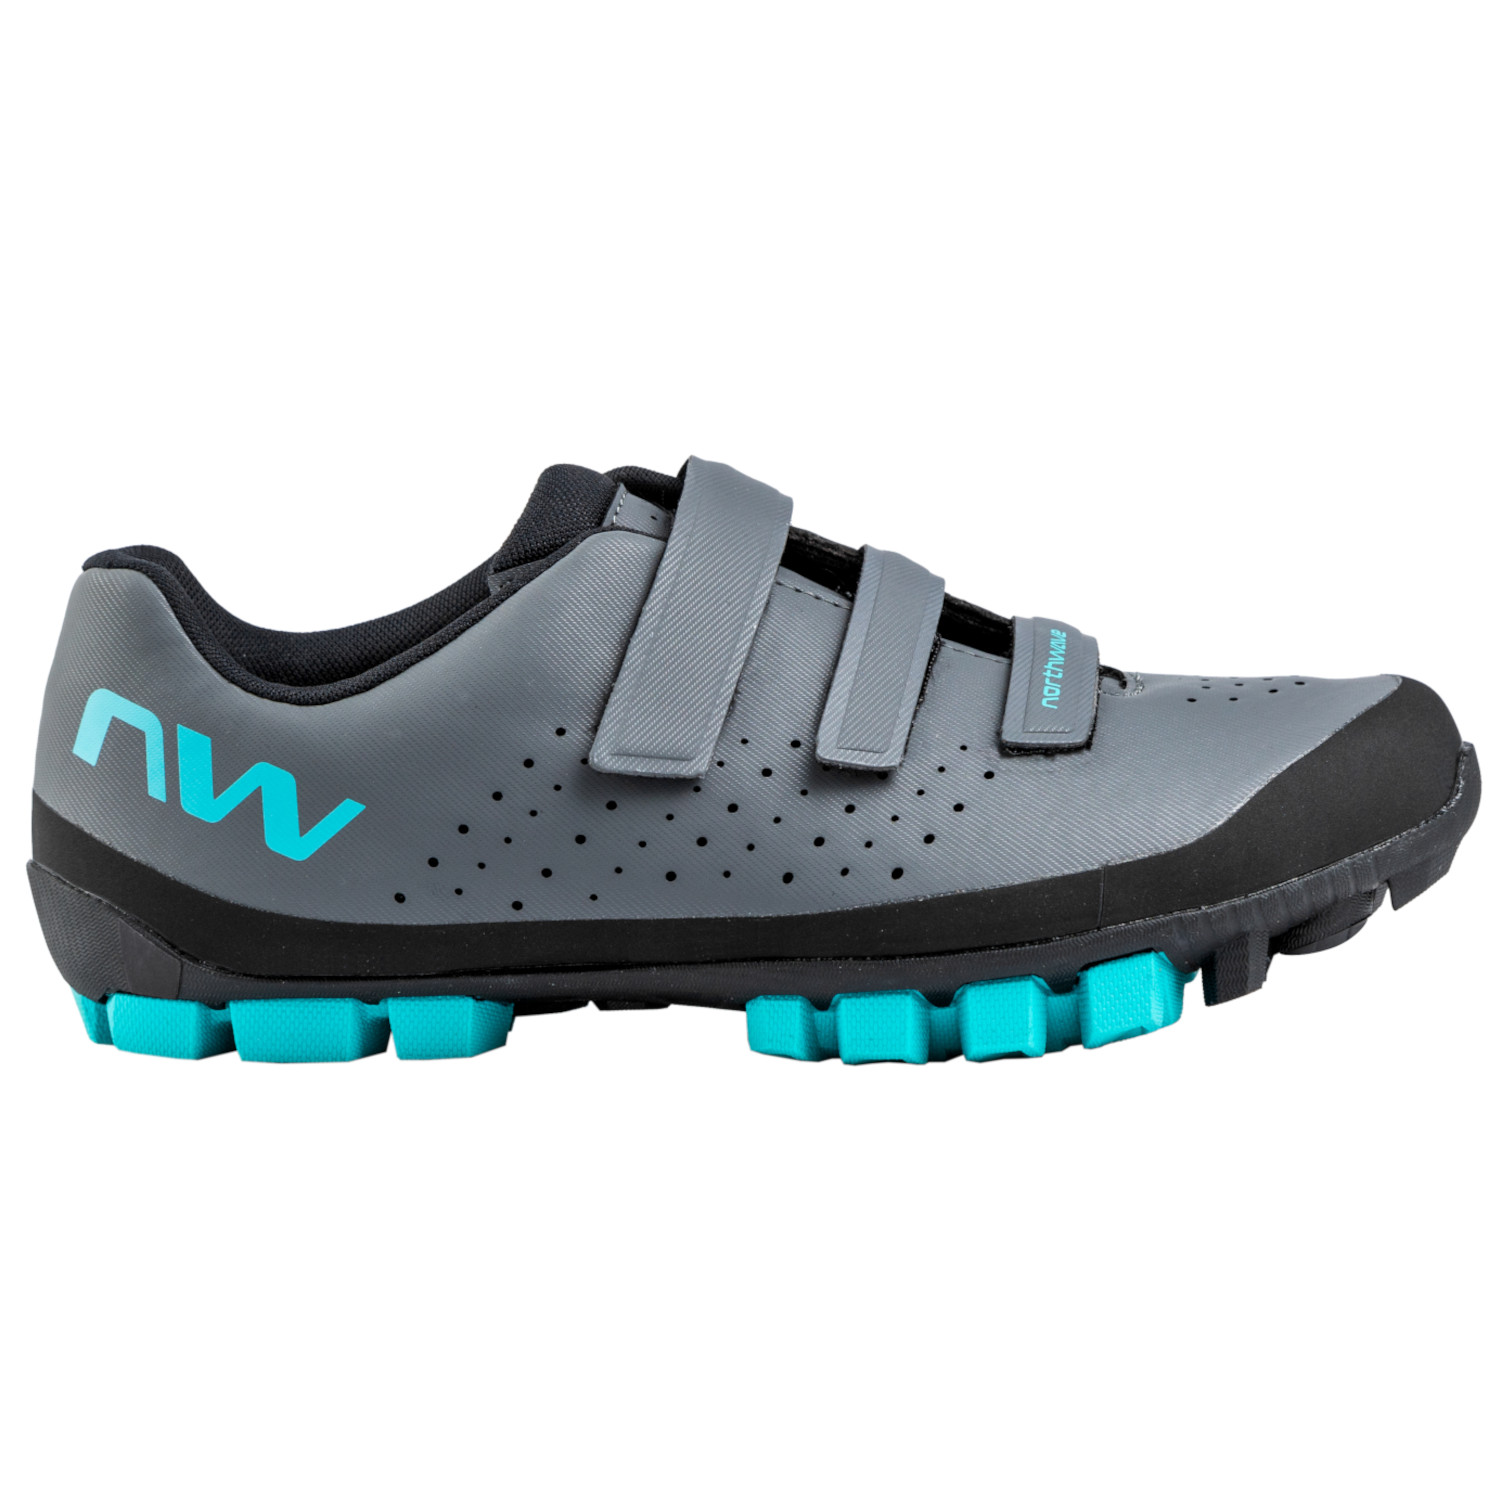 Picture of Northwave Hammer MTB Shoes Women - dark grey/turquoise 75